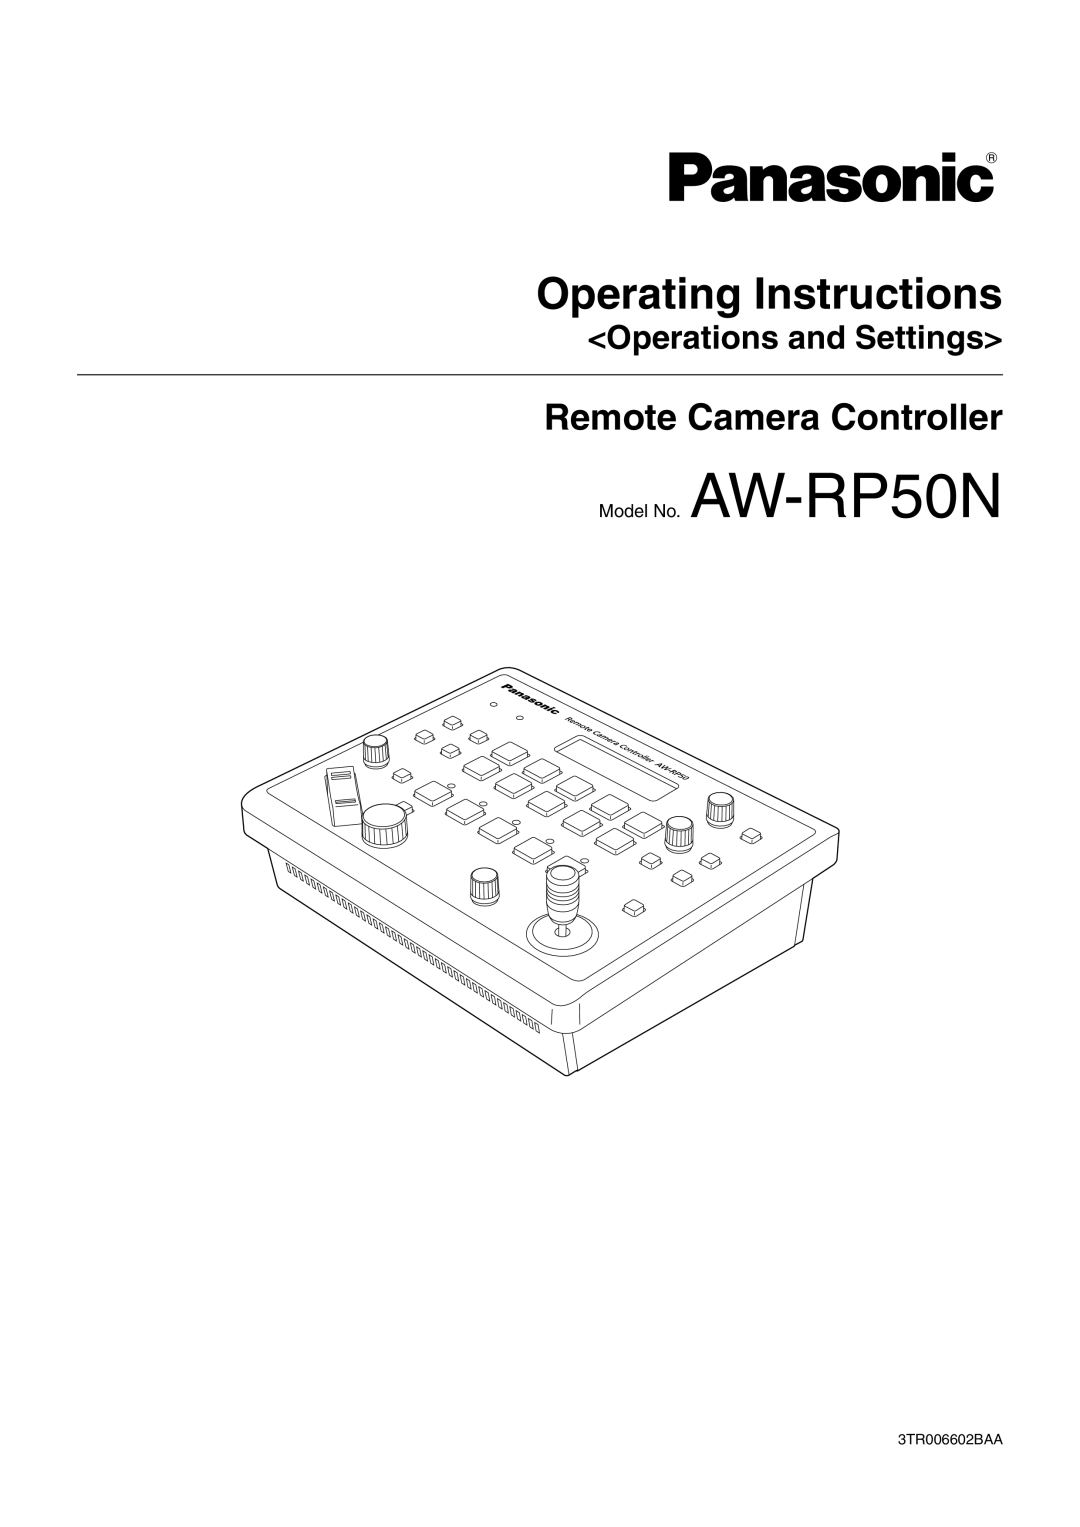 Panasonic AW-RP50N operating instructions Operating Instructions, Remote Camera Controller, Operations and Settings 